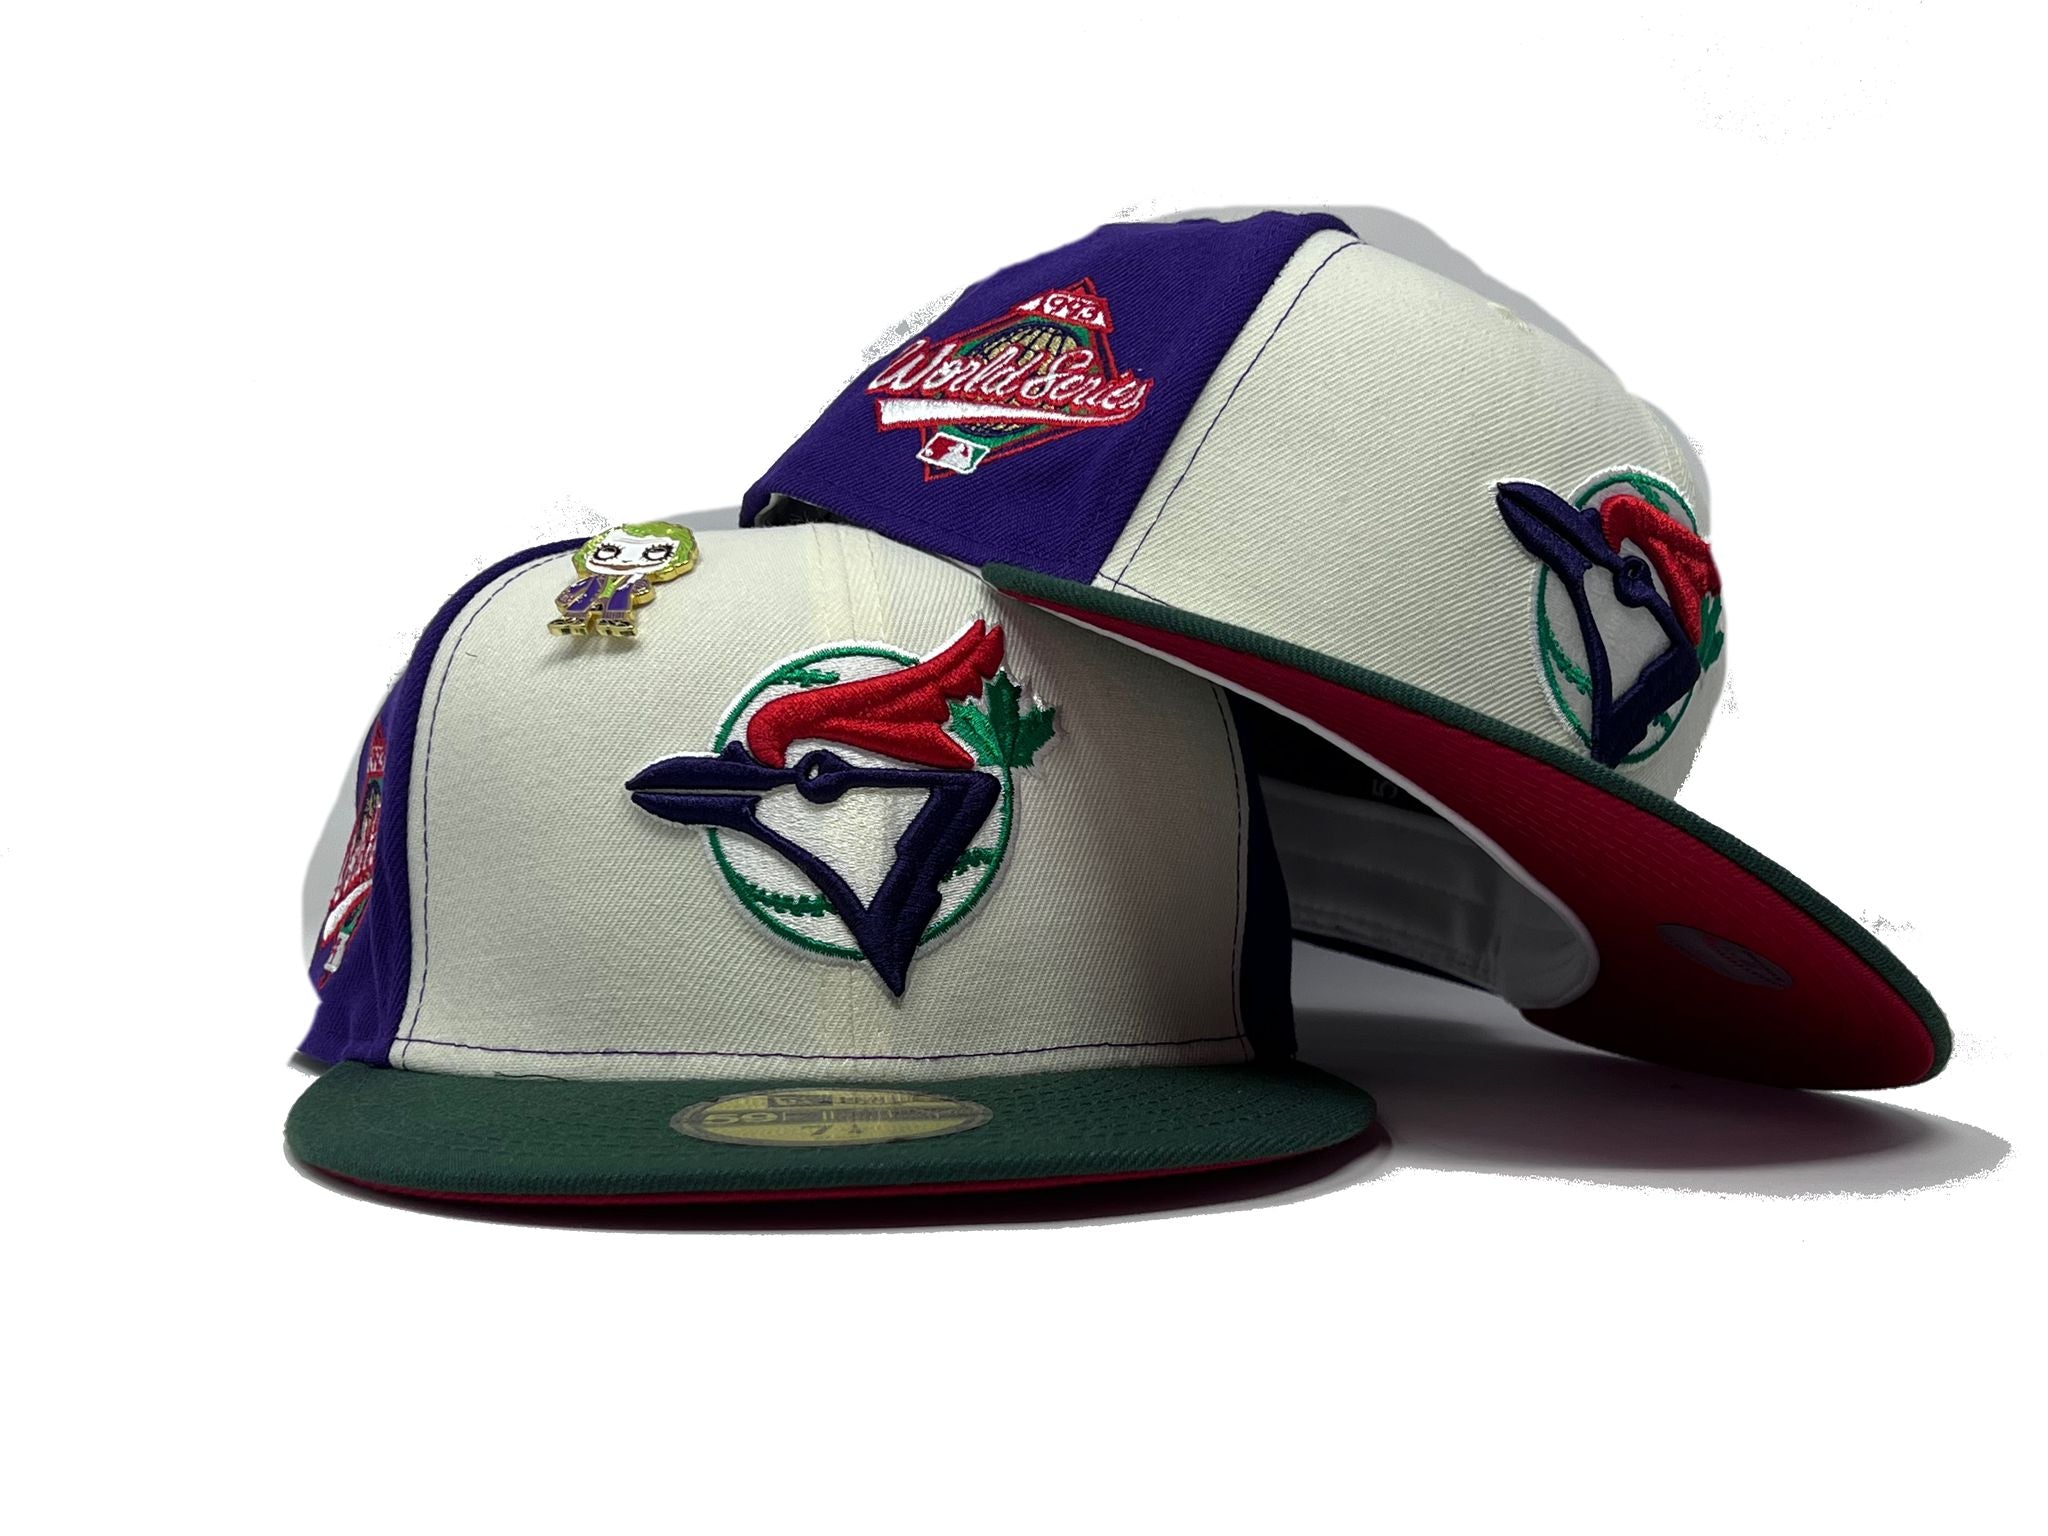 Toronto Blue Jays Fitted New Era 59FIFTY 1993 World Series Patch